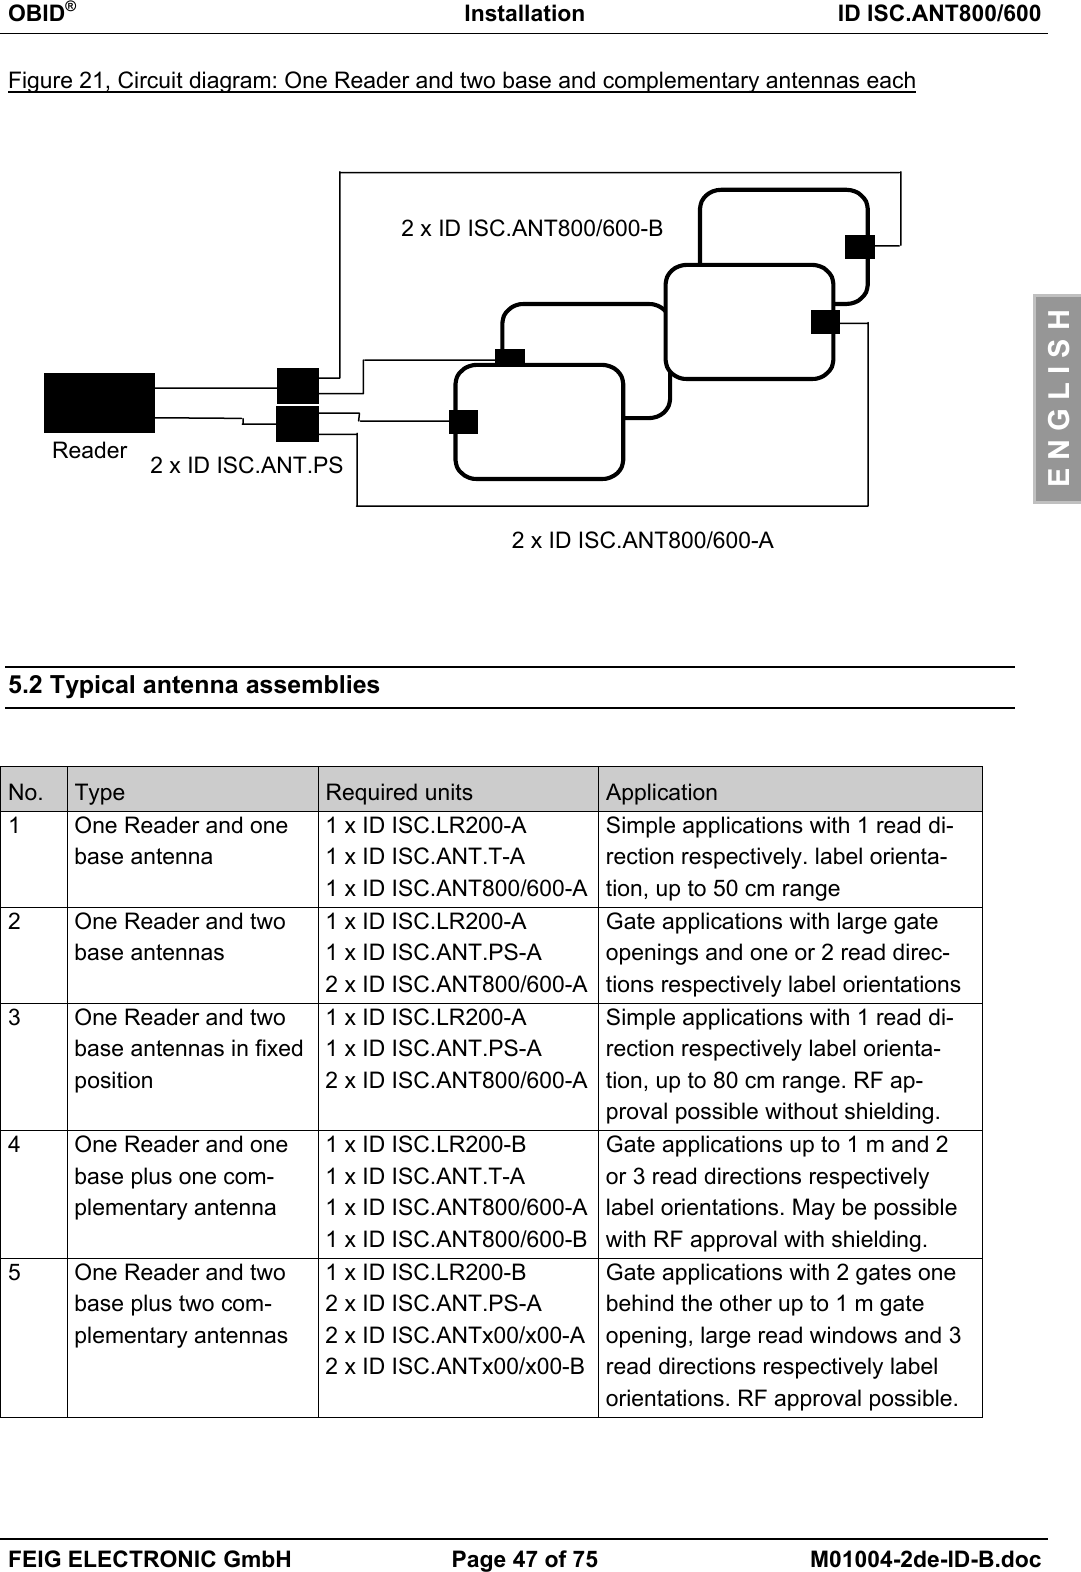 OBID®Installation ID ISC.ANT800/600FEIG ELECTRONIC GmbH Page 47 of 75 M01004-2de-ID-B.docE N G L I S HFigure 21, Circuit diagram: One Reader and two base and complementary antennas each5.2 Typical antenna assembliesNo. Type Required units Application1 One Reader and onebase antenna1 x ID ISC.LR200-A1 x ID ISC.ANT.T-A1 x ID ISC.ANT800/600-ASimple applications with 1 read di-rection respectively. label orienta-tion, up to 50 cm range2 One Reader and twobase antennas1 x ID ISC.LR200-A1 x ID ISC.ANT.PS-A2 x ID ISC.ANT800/600-AGate applications with large gateopenings and one or 2 read direc-tions respectively label orientations3 One Reader and twobase antennas in fixedposition1 x ID ISC.LR200-A1 x ID ISC.ANT.PS-A2 x ID ISC.ANT800/600-ASimple applications with 1 read di-rection respectively label orienta-tion, up to 80 cm range. RF ap-proval possible without shielding.4 One Reader and onebase plus one com-plementary antenna1 x ID ISC.LR200-B1 x ID ISC.ANT.T-A1 x ID ISC.ANT800/600-A1 x ID ISC.ANT800/600-BGate applications up to 1 m and 2or 3 read directions respectivelylabel orientations. May be possiblewith RF approval with shielding.5 One Reader and twobase plus two com-plementary antennas1 x ID ISC.LR200-B2 x ID ISC.ANT.PS-A2 x ID ISC.ANTx00/x00-A2 x ID ISC.ANTx00/x00-BGate applications with 2 gates onebehind the other up to 1 m gateopening, large read windows and 3read directions respectively labelorientations. RF approval possible.2 x ID ISC.ANT.PS2 x ID ISC.ANT800/600-B2 x ID ISC.ANT800/600-AReader